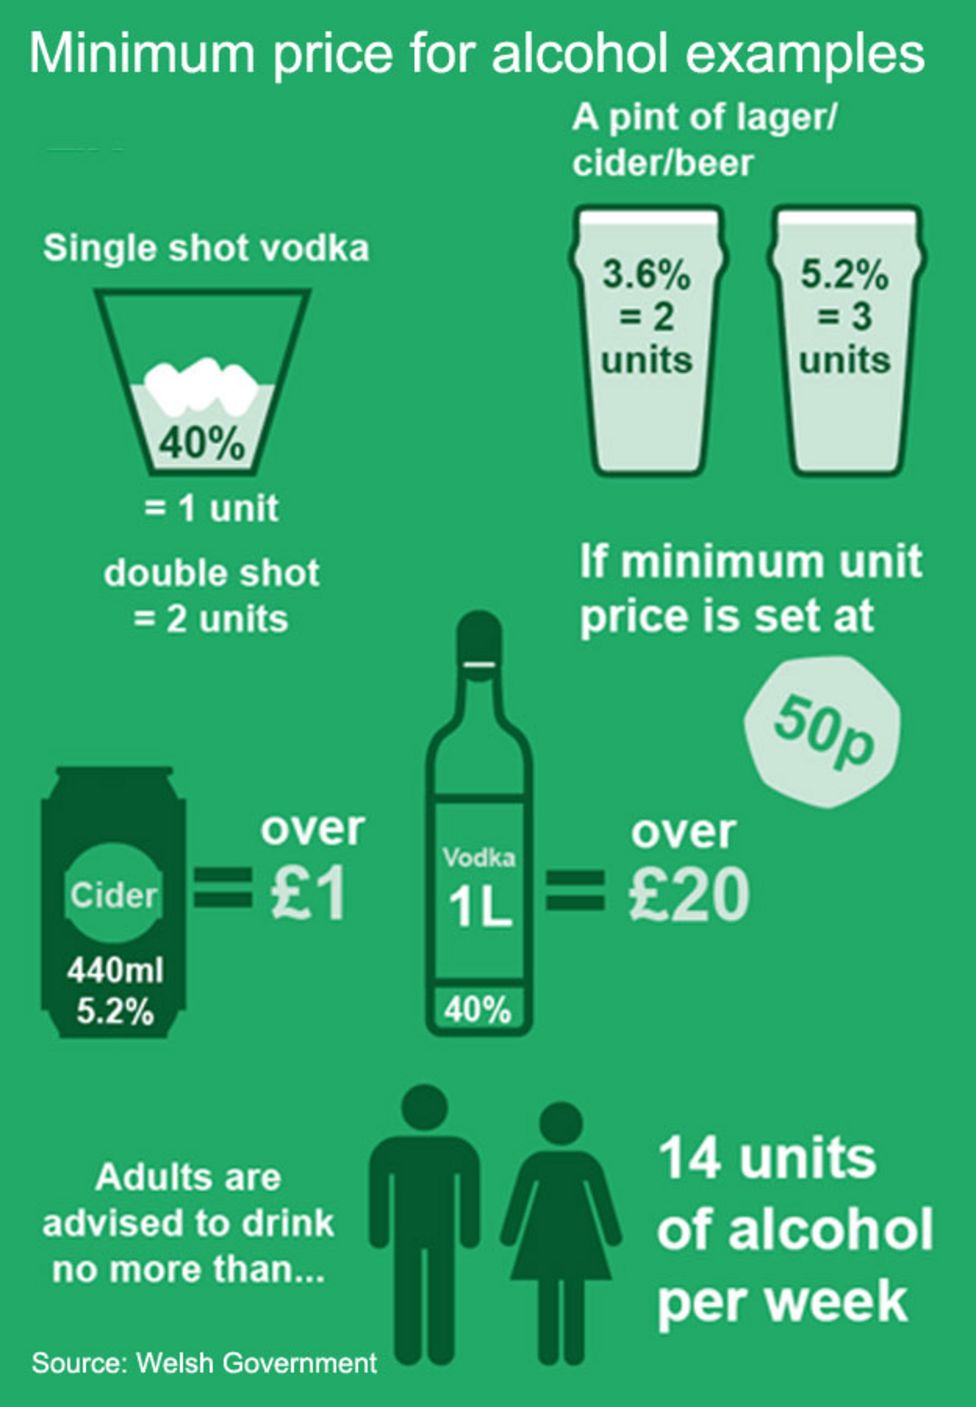 Minimum alcohol price law unveiled in Wales - BBC News